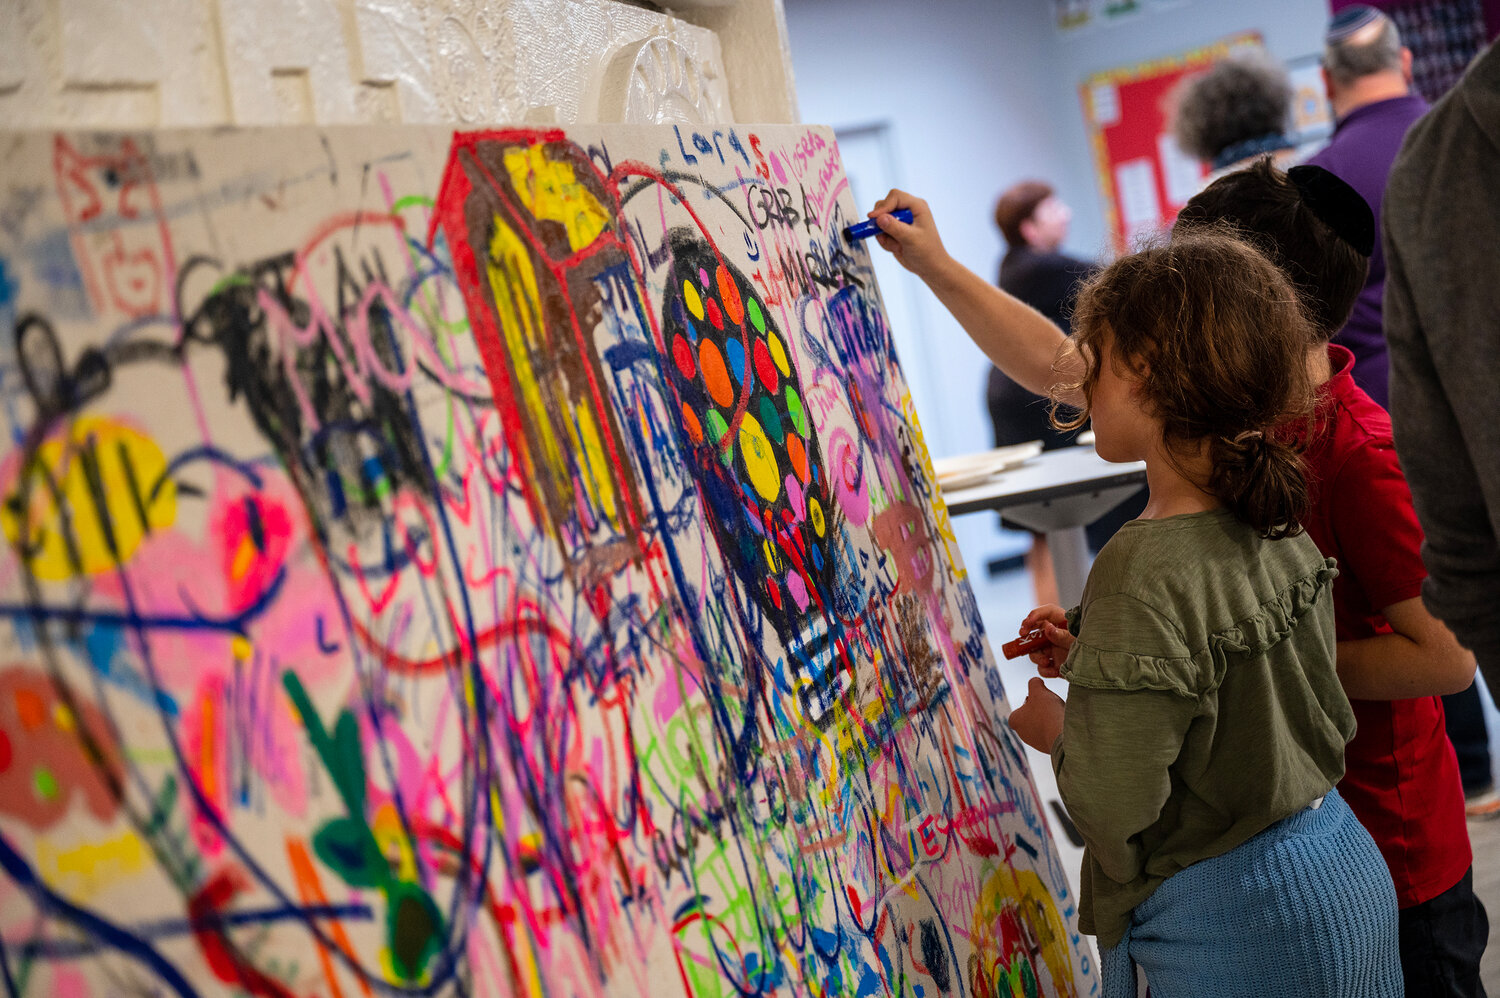 SAR Academy hosted Interactive Family Arts Festival on Monday, May 22 where they showcased students’ work. The hands-on interactive art gallery showed kids painting on the “creative canvas collaboration” with Noel Gussen.